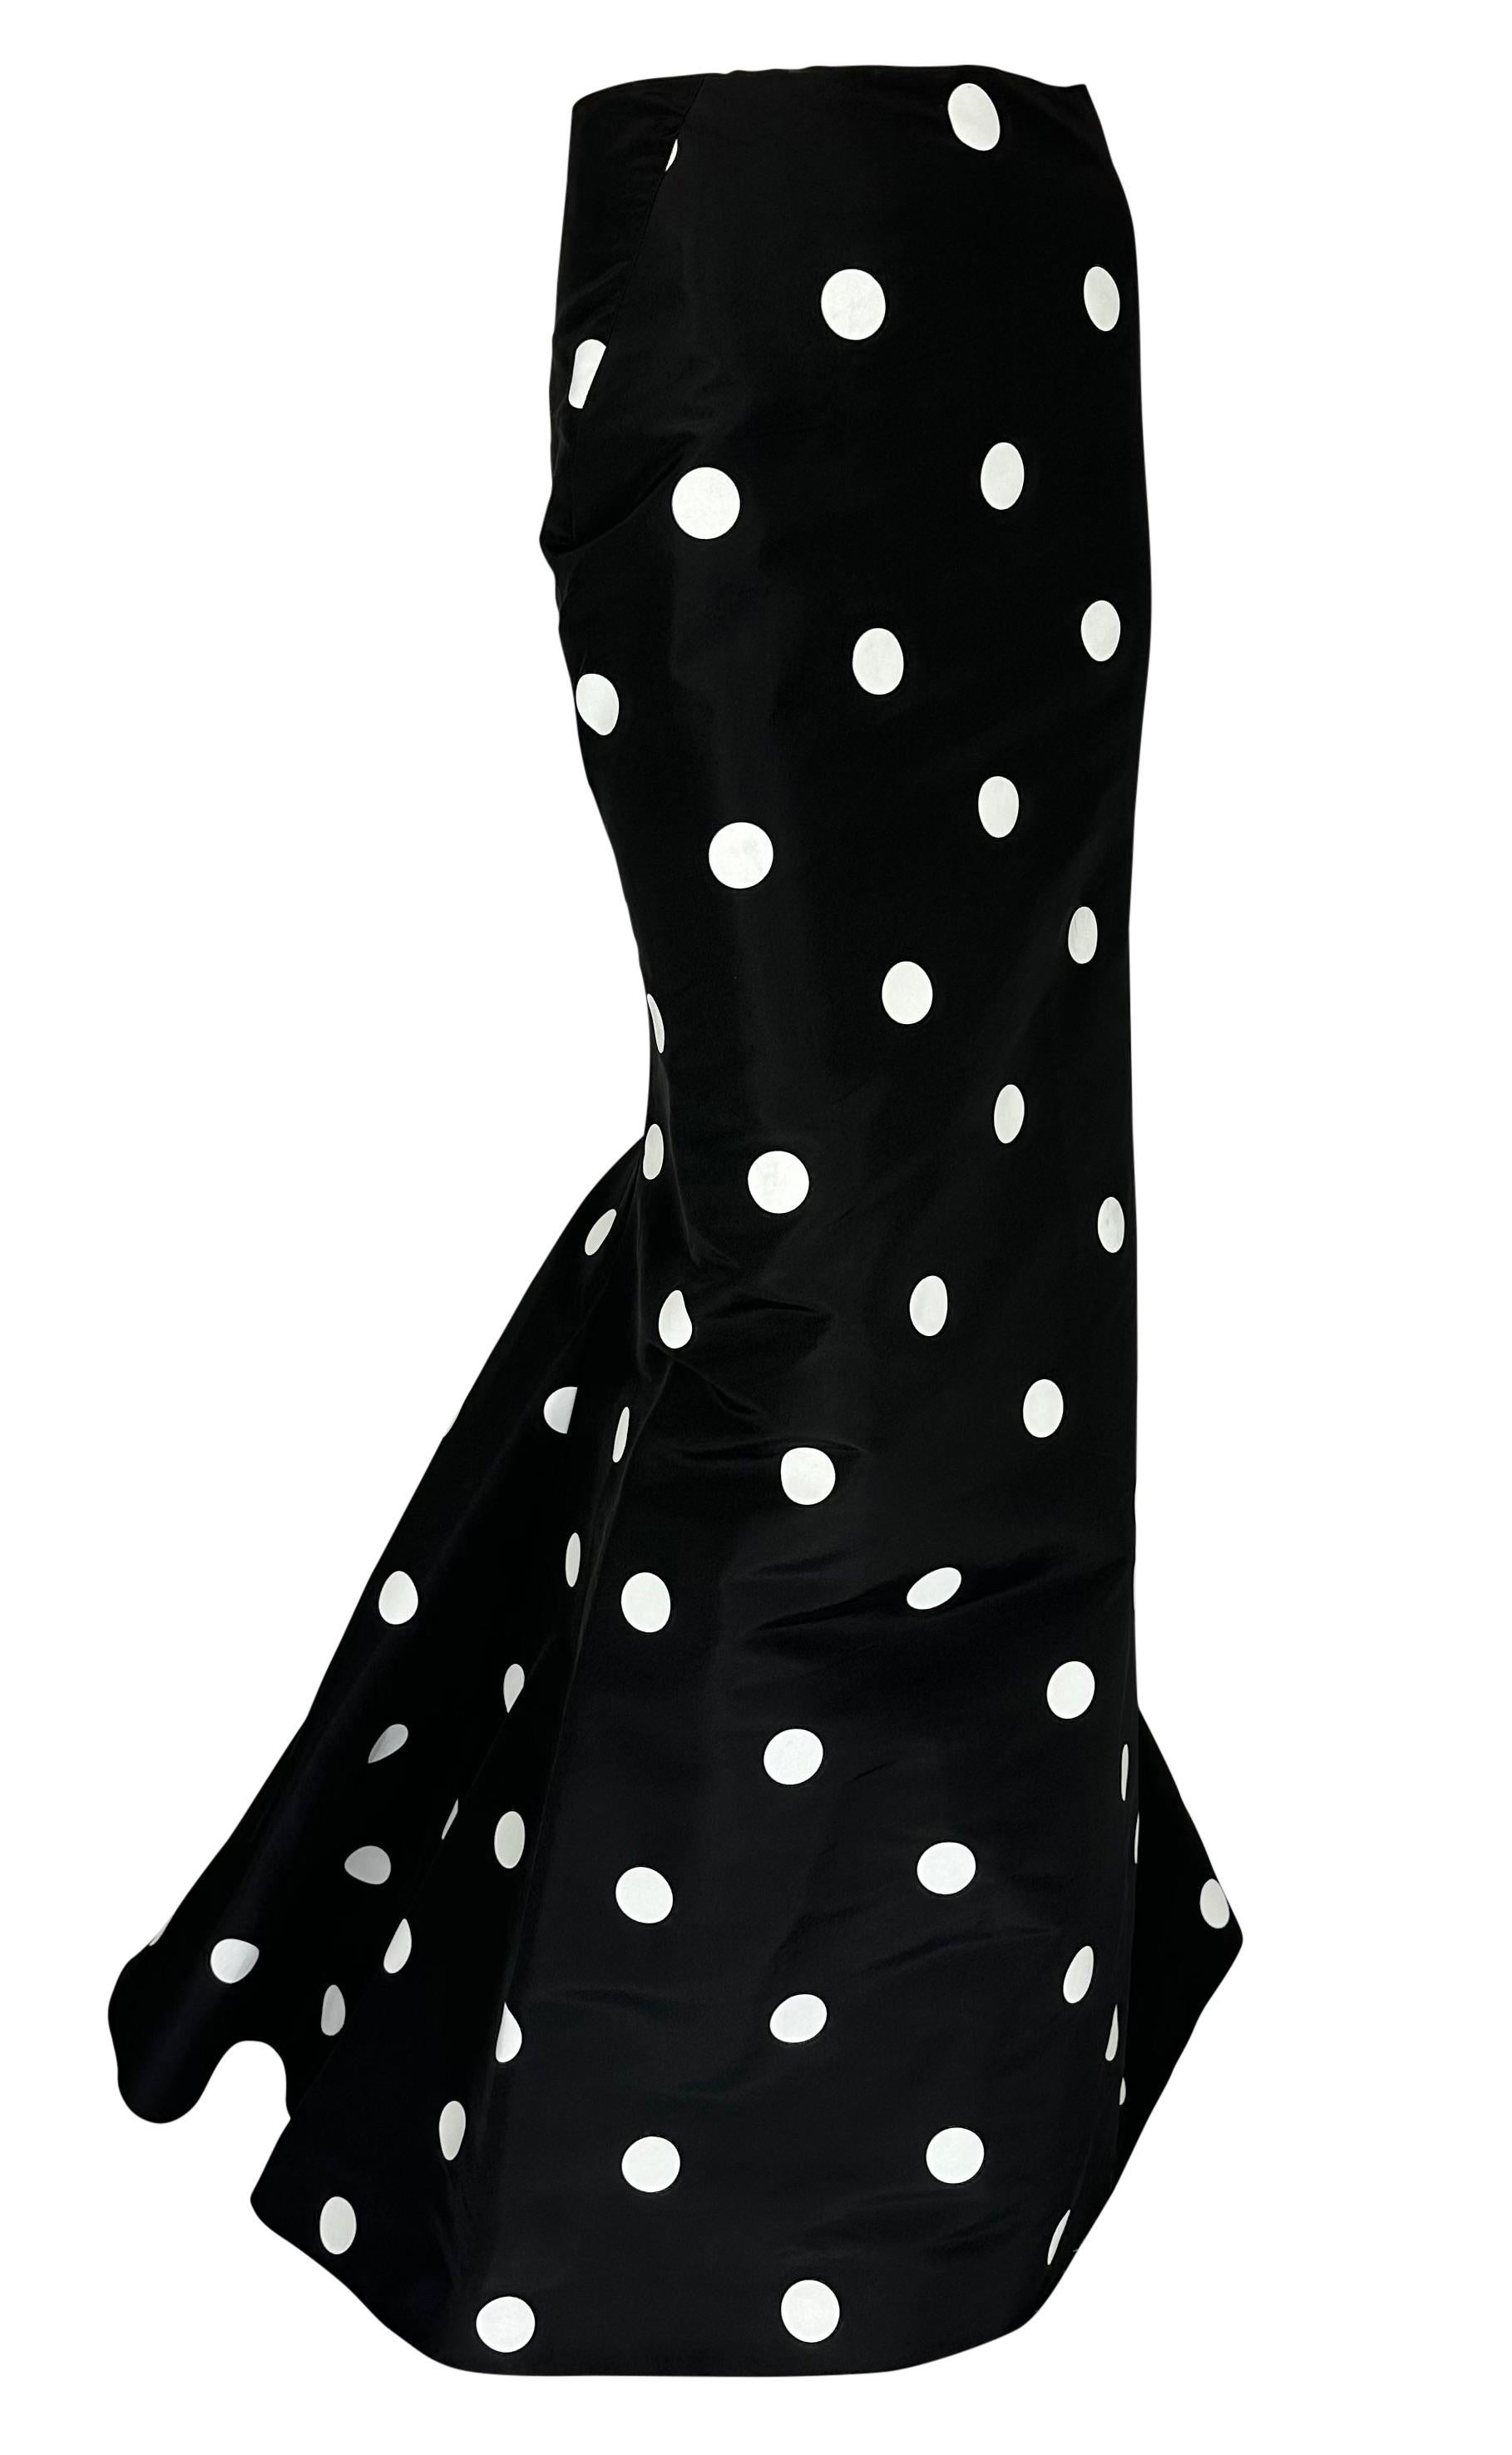 TheRealList presents: an incredible black and white polka dot high-waisted Ralph Lauren Collection full-length skirt. From the Spring/Summer 2008 40th anniversary collection, this skirt debuted in the season’s grandiose NYC runway presentation as